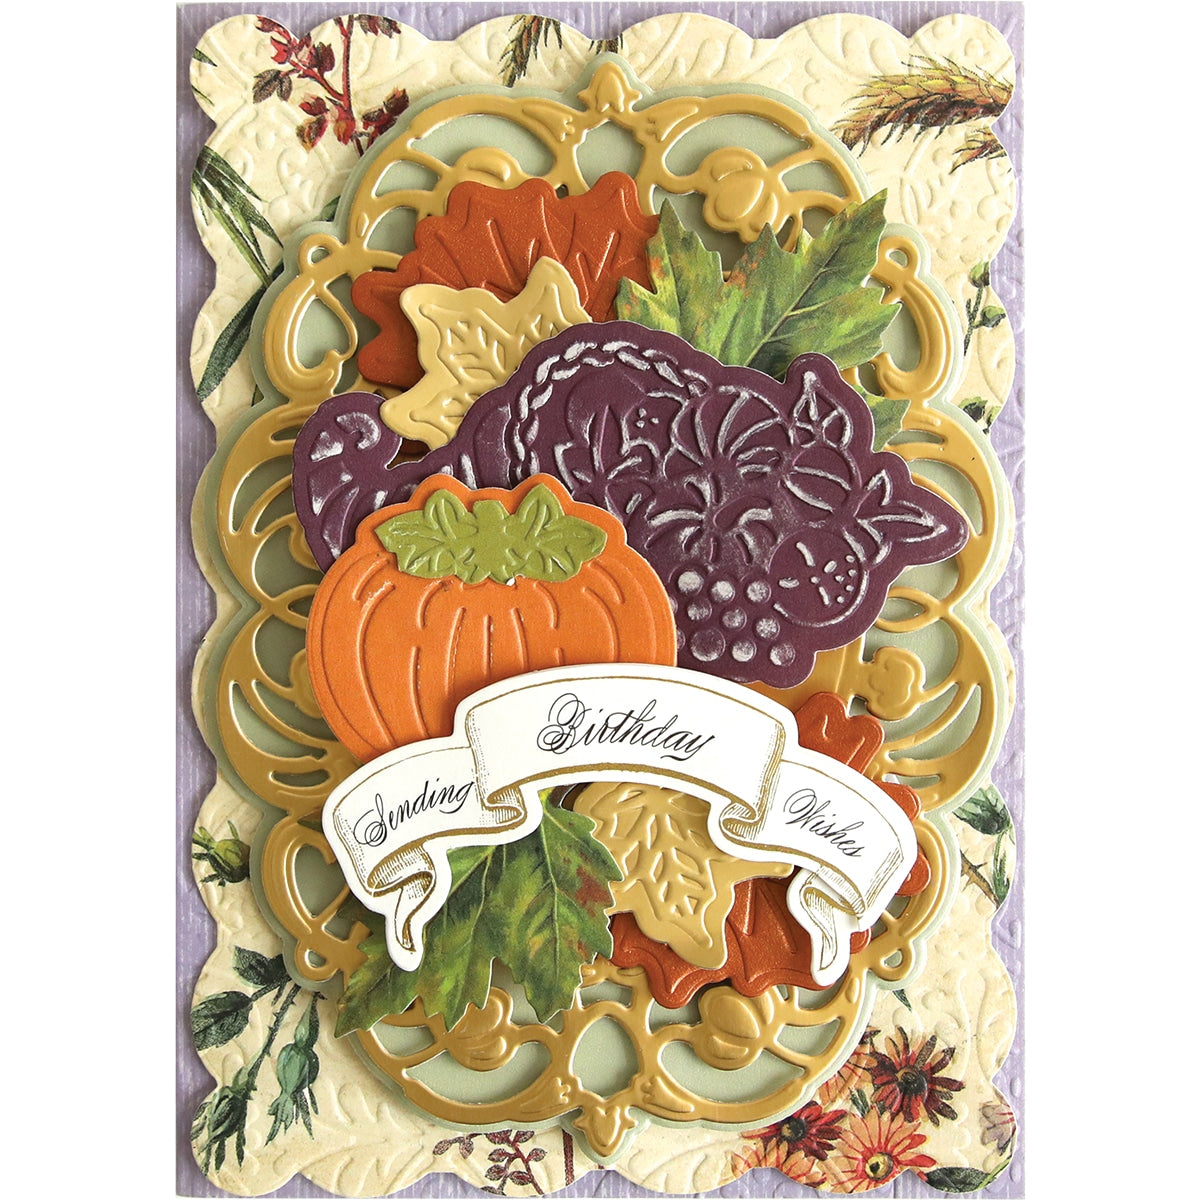 a card with a pumpkin, grapes, and other vegetables.